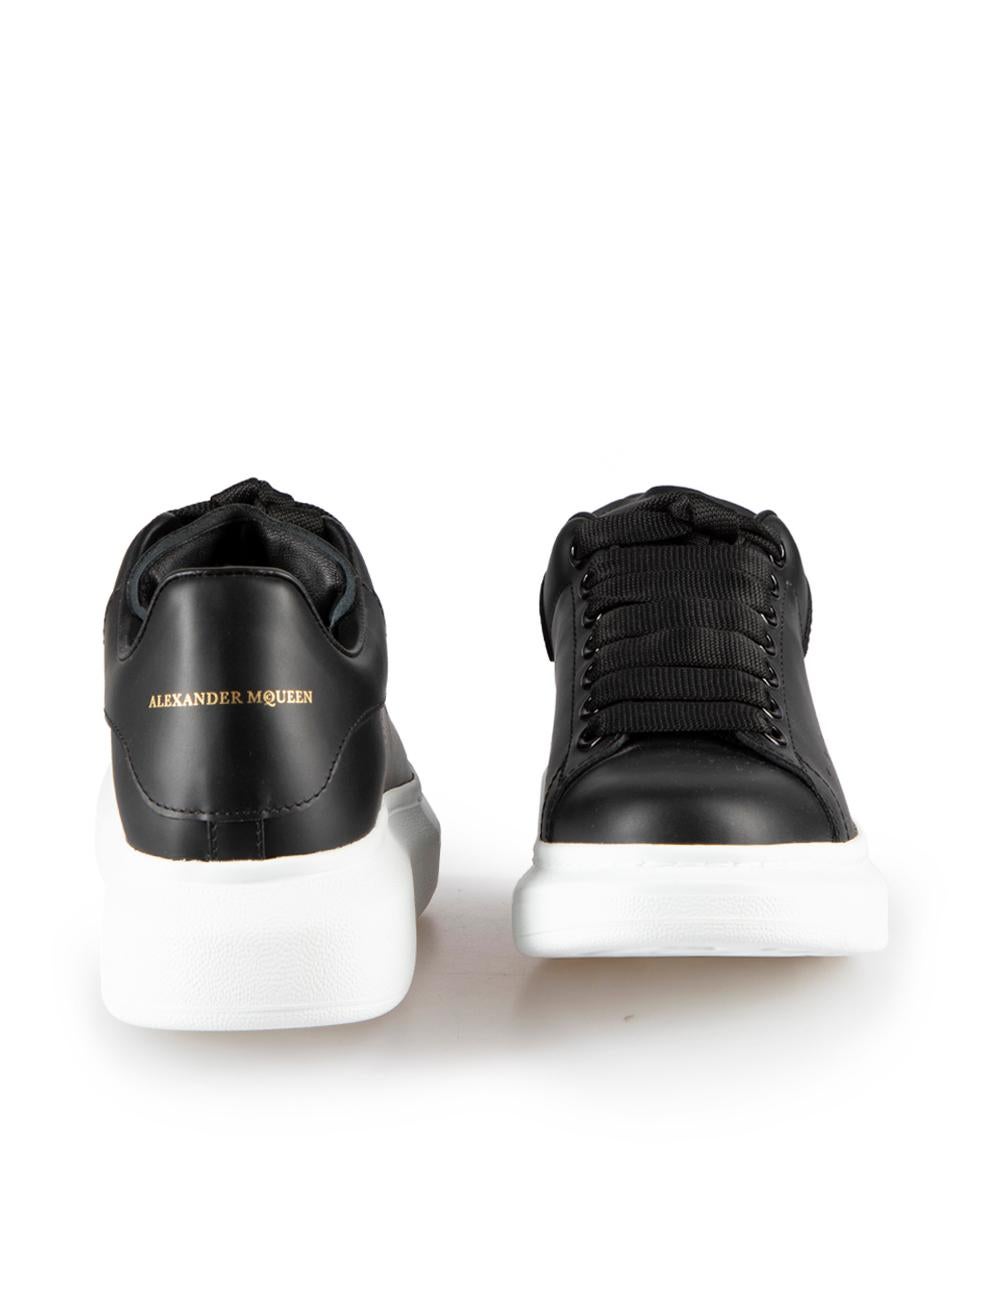 Alexander McQueen Black Leather Oversized Platform Trainers Size IT 37 In New Condition In London, GB